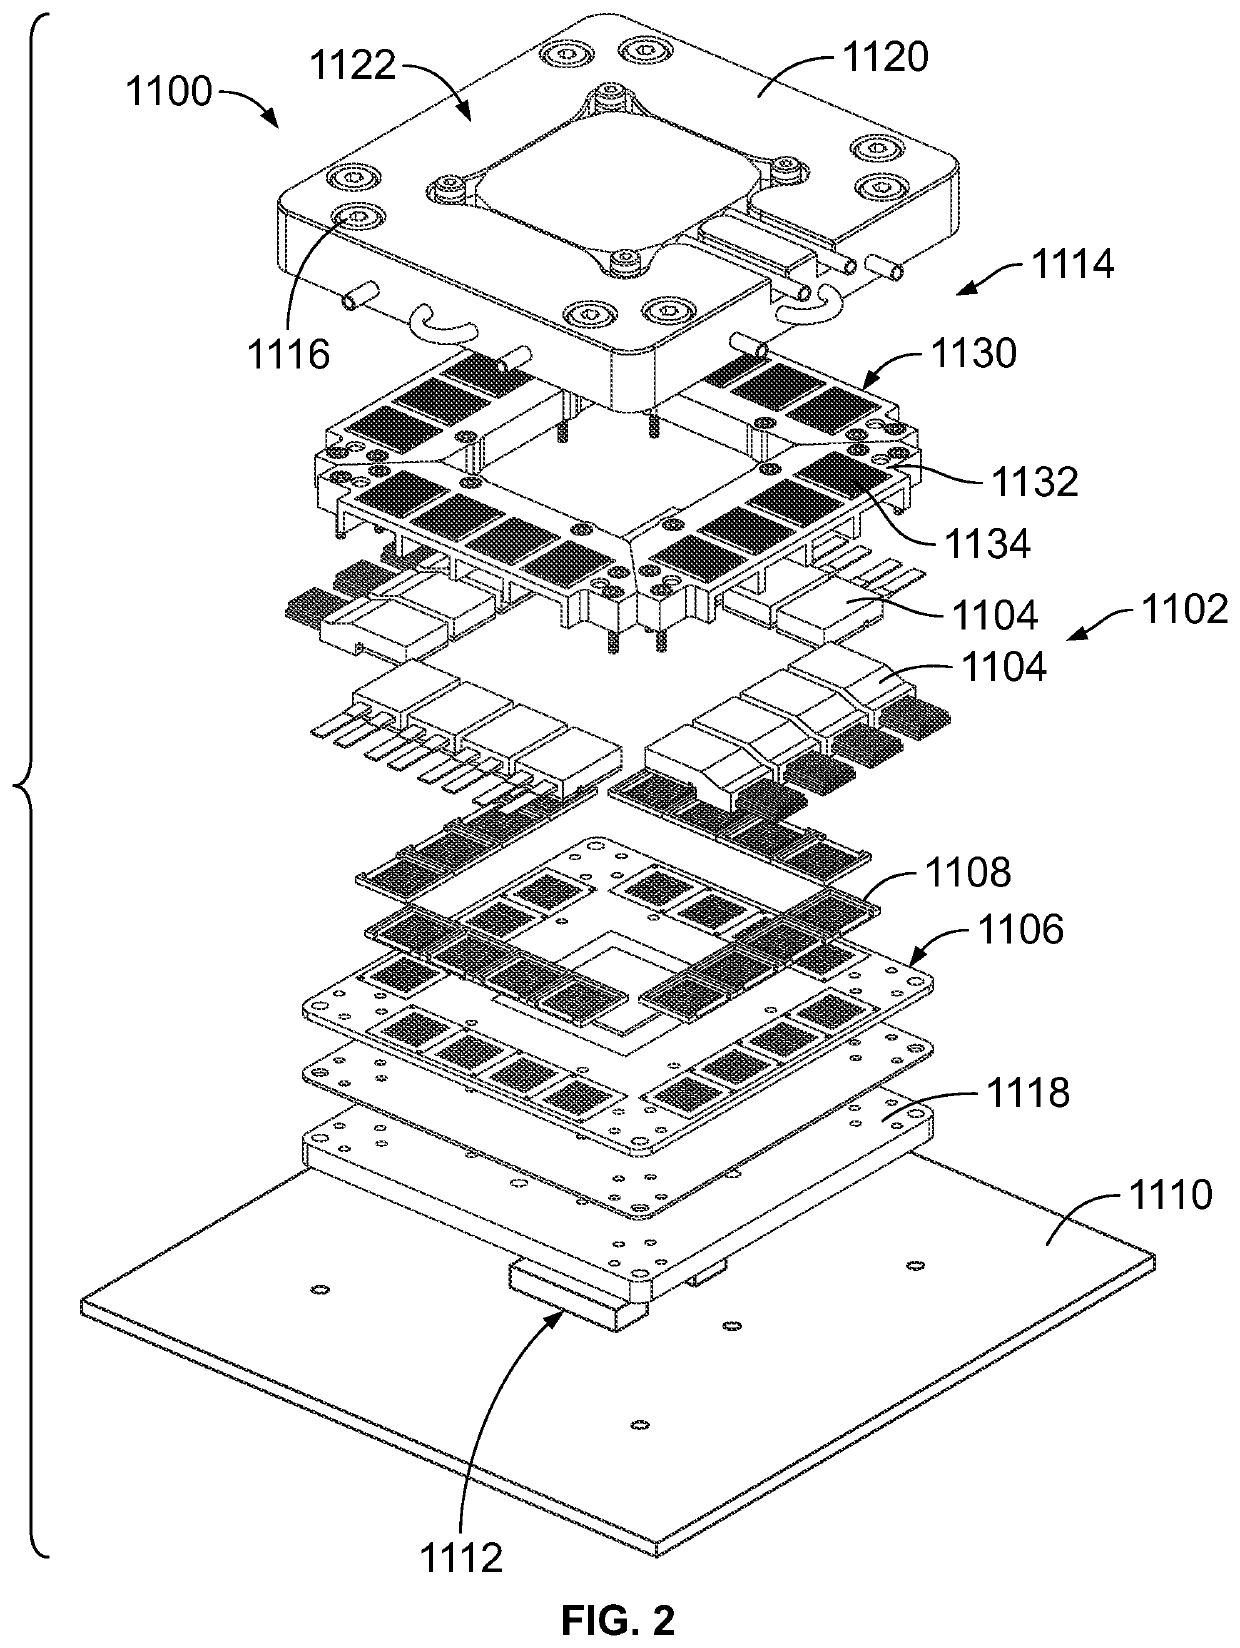 Electronic assembly including a compression assembly for cable connector modules